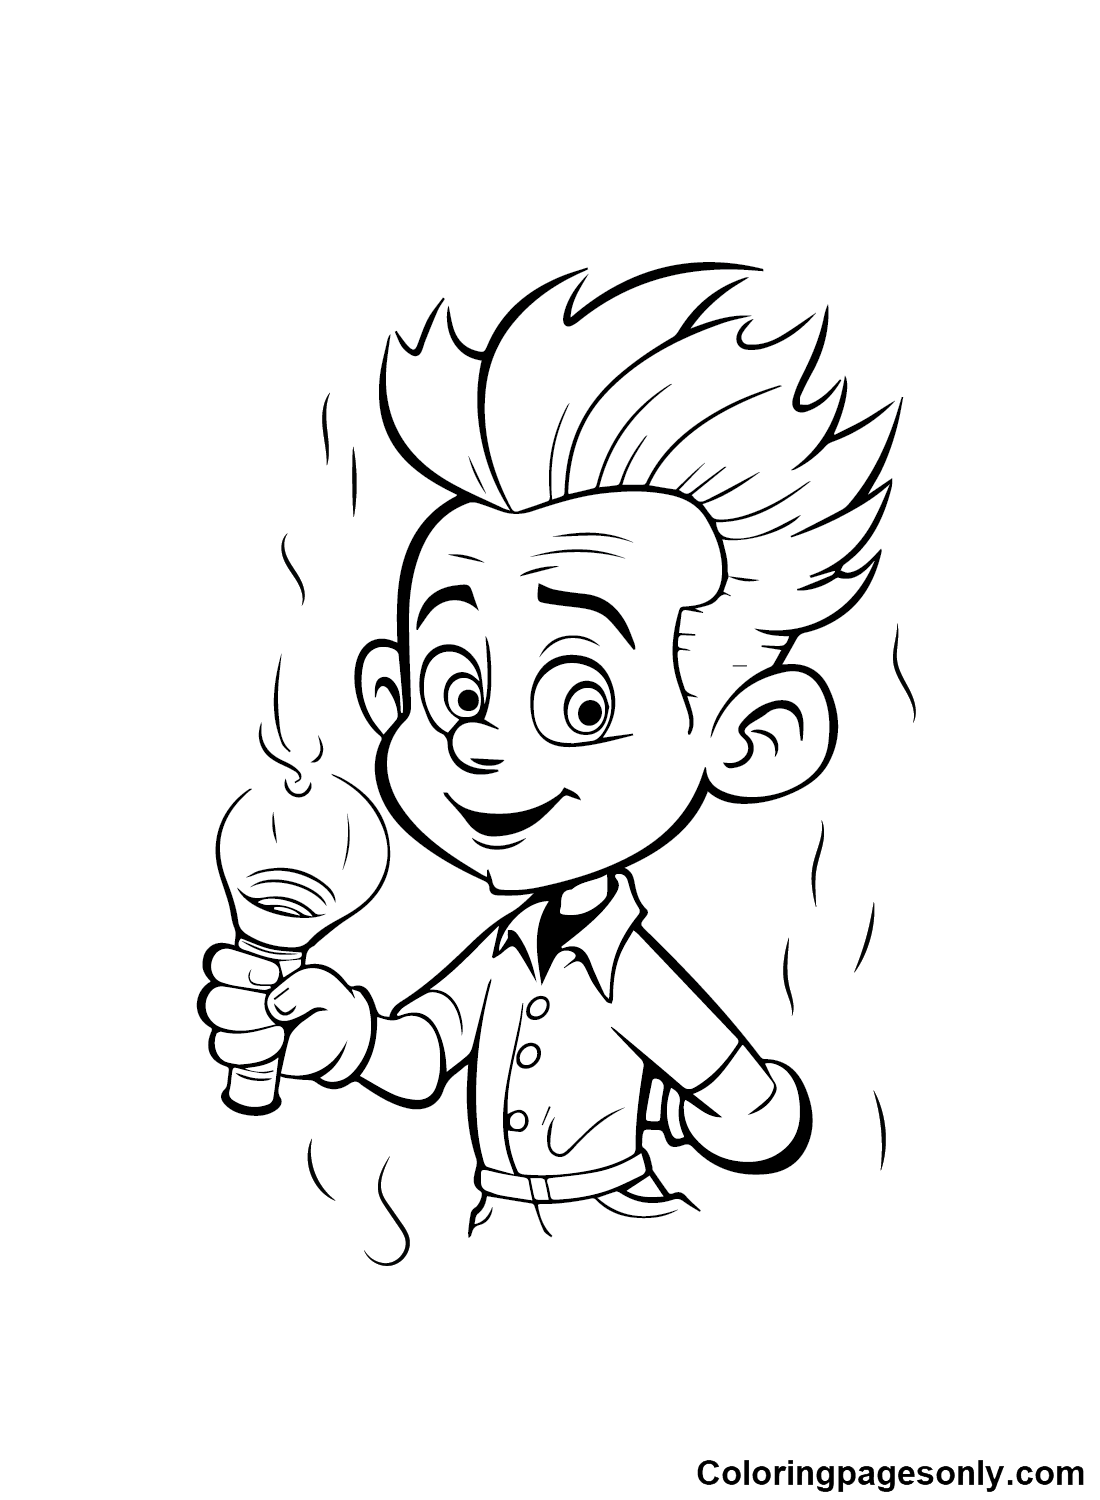 Jimmy Neutron Images to Print Coloring Page - Free Printable Coloring Pages